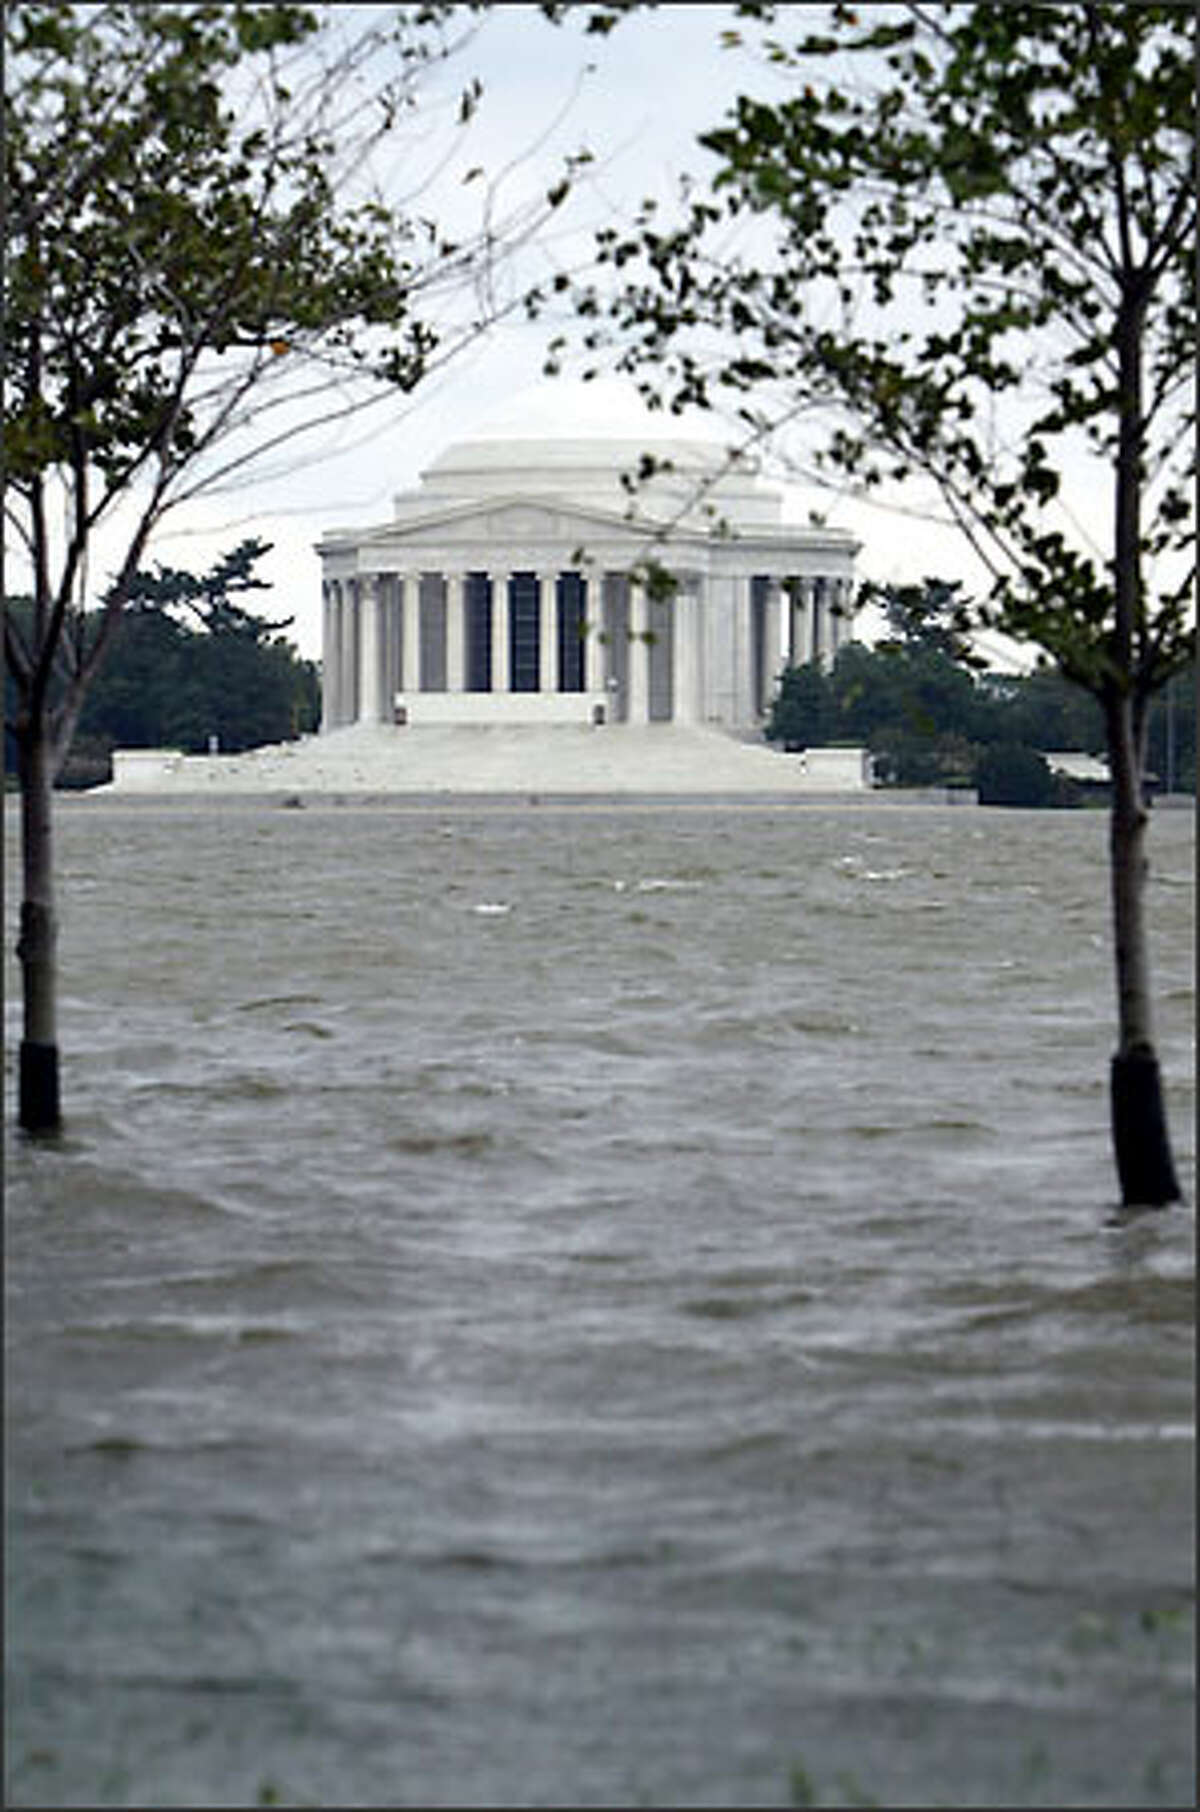 The overflowing Tidal Basin, across from the Jefferson Memorial, in Washington, D.C., in the aftermath of Hurricane Isabel. Thousands of residents were without lights, hundreds of trees littered the landscape, and all three branches of government were basically shut down. (AP Photo/Evan Vucci)